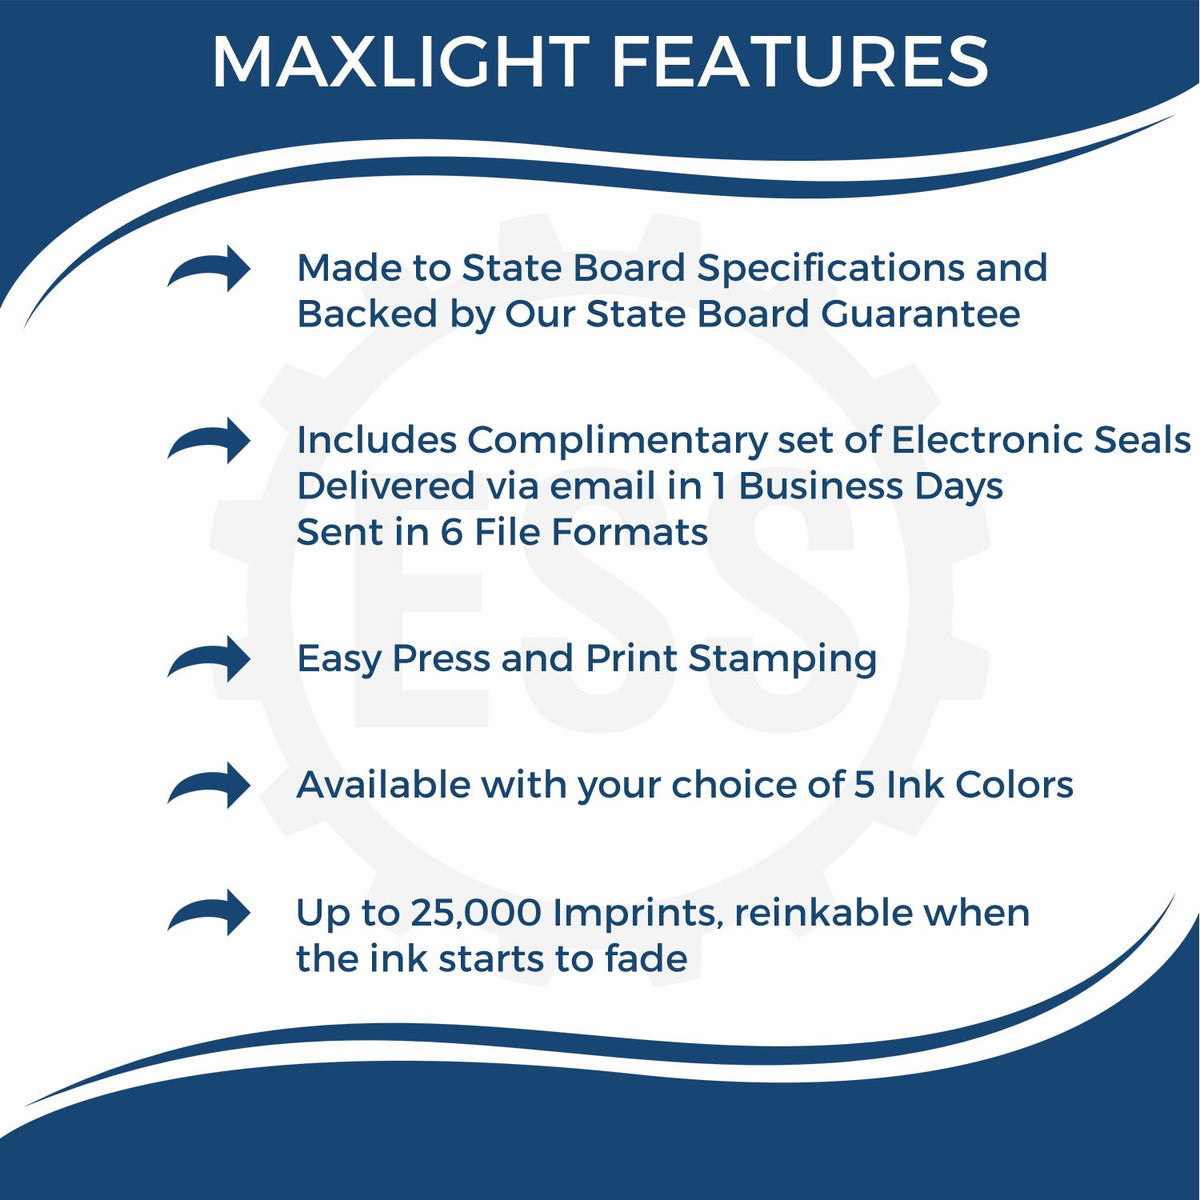 A picture of an infographic highlighting the selling points for the Premium MaxLight Pre-Inked New Jersey Geology Stamp